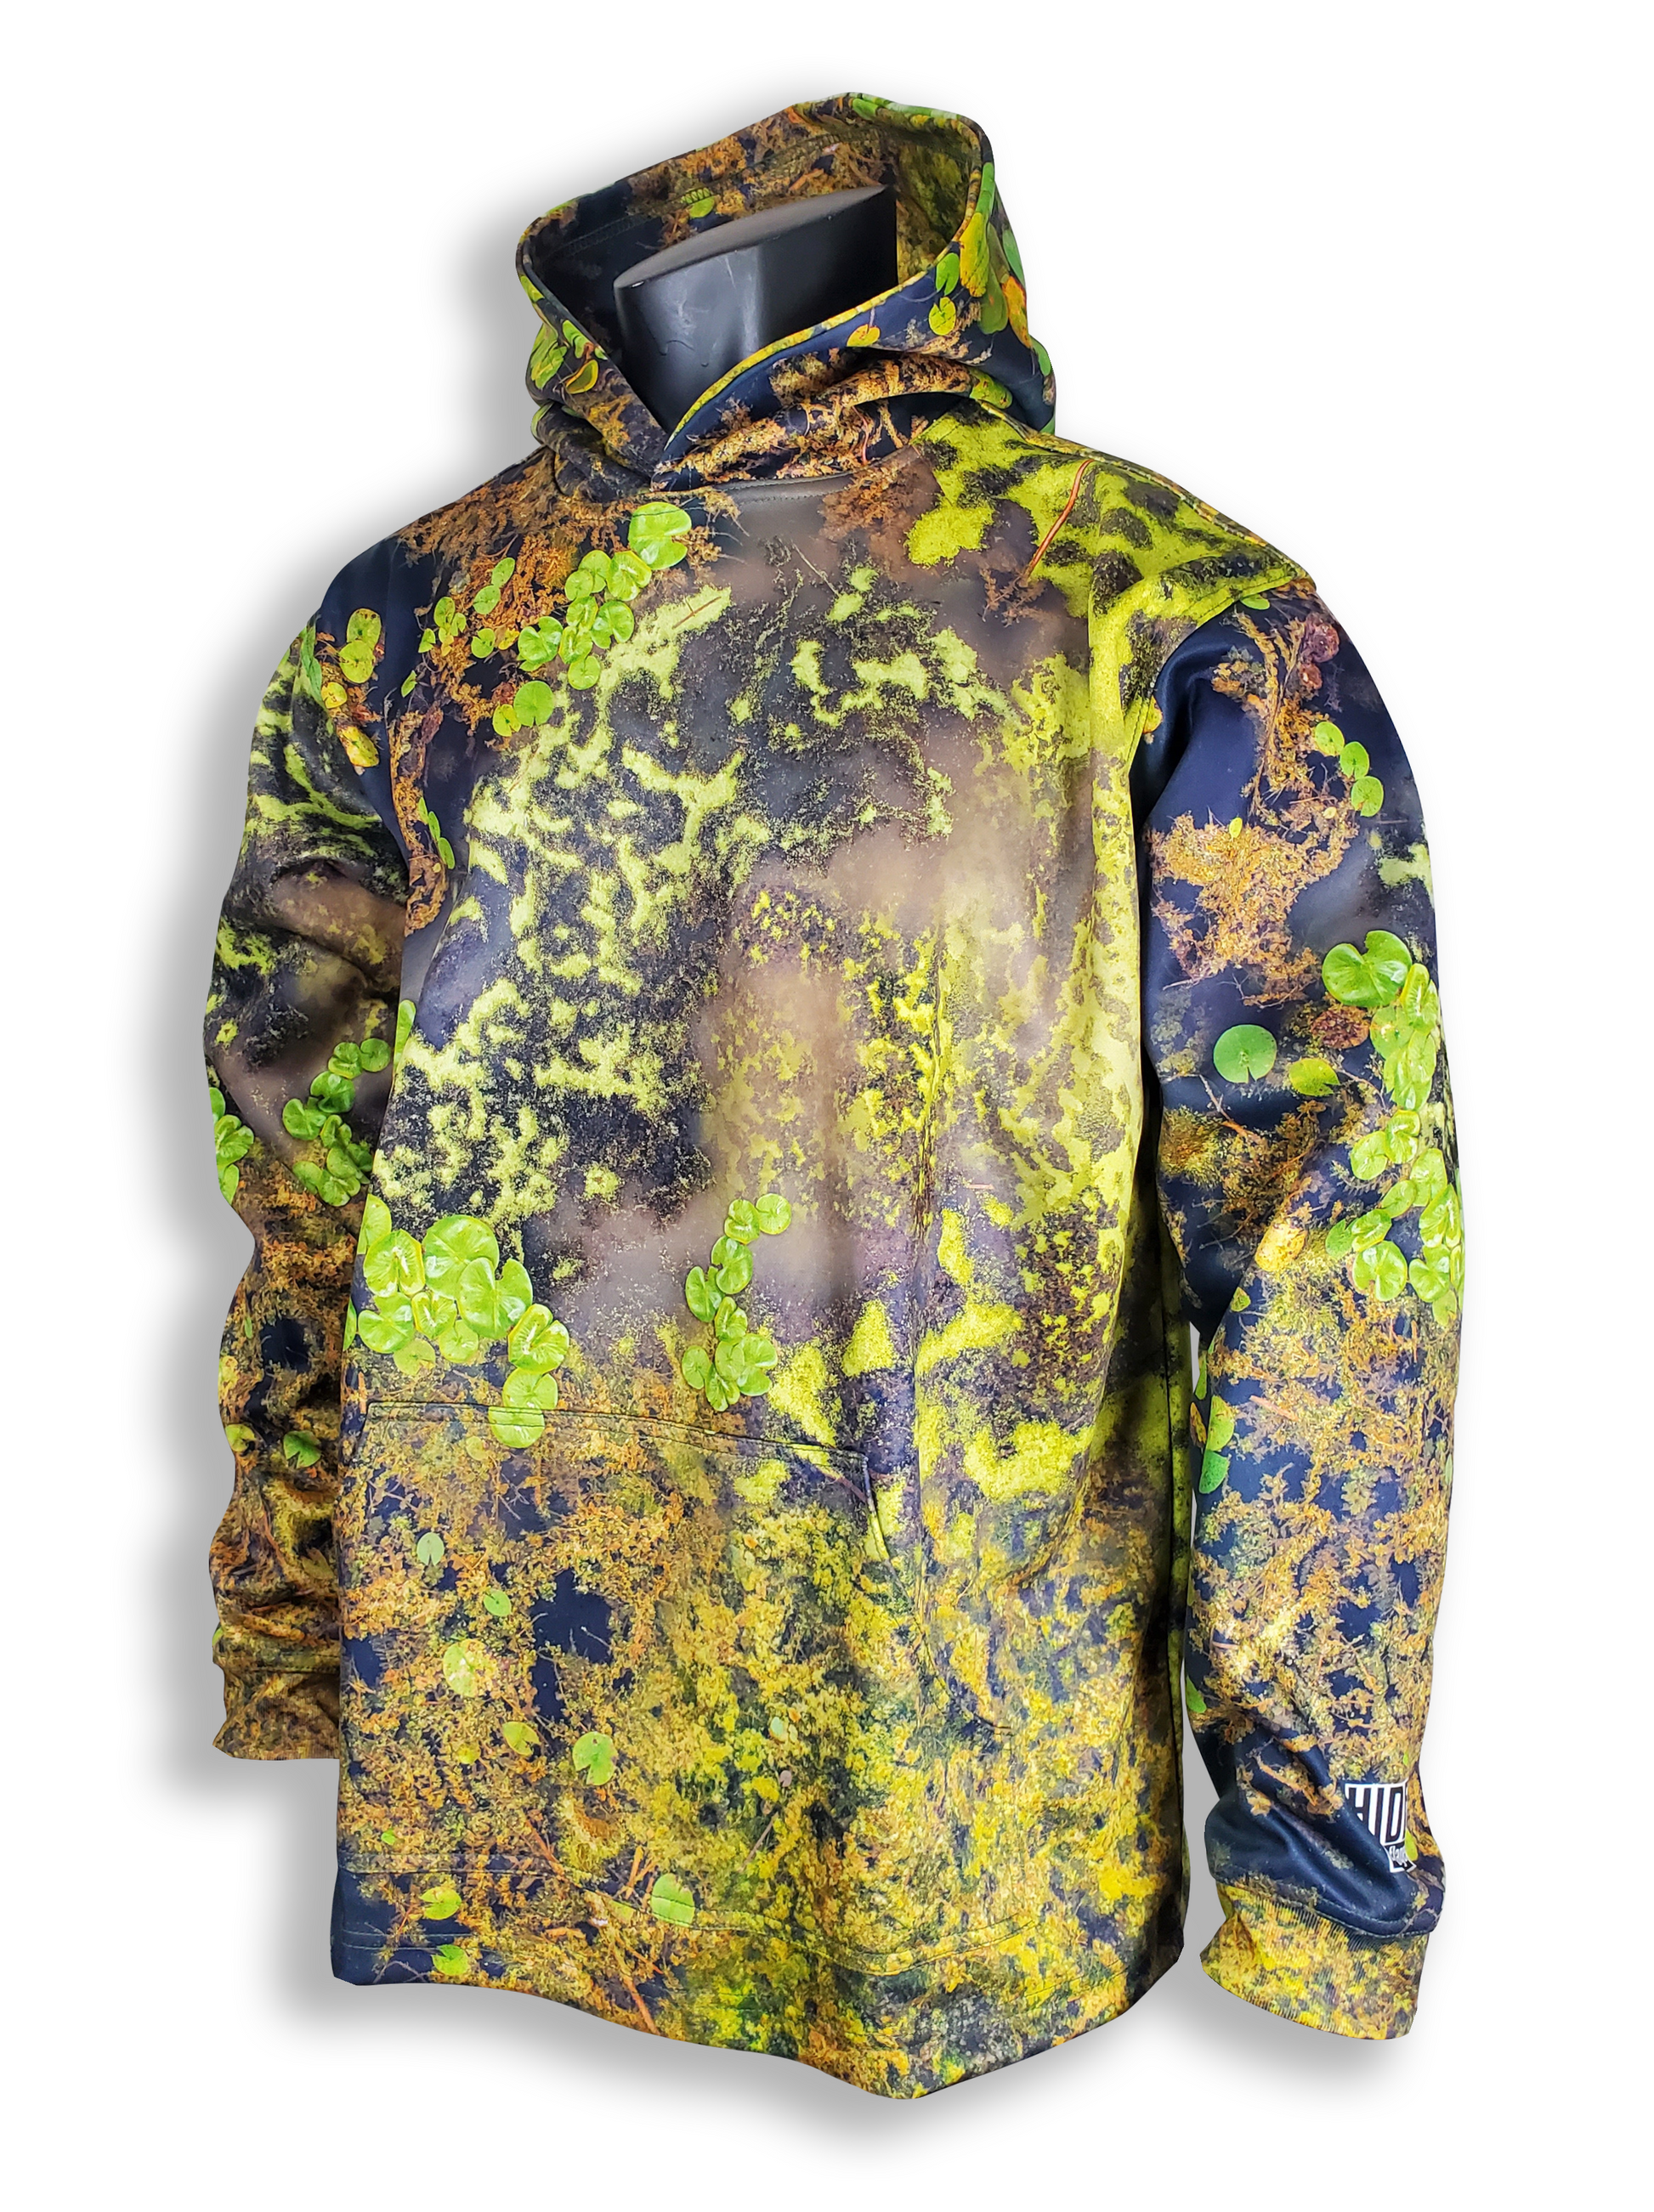 Clearance - LIFESTYLE Fishing Apparel - Slop Camo - Hoodie